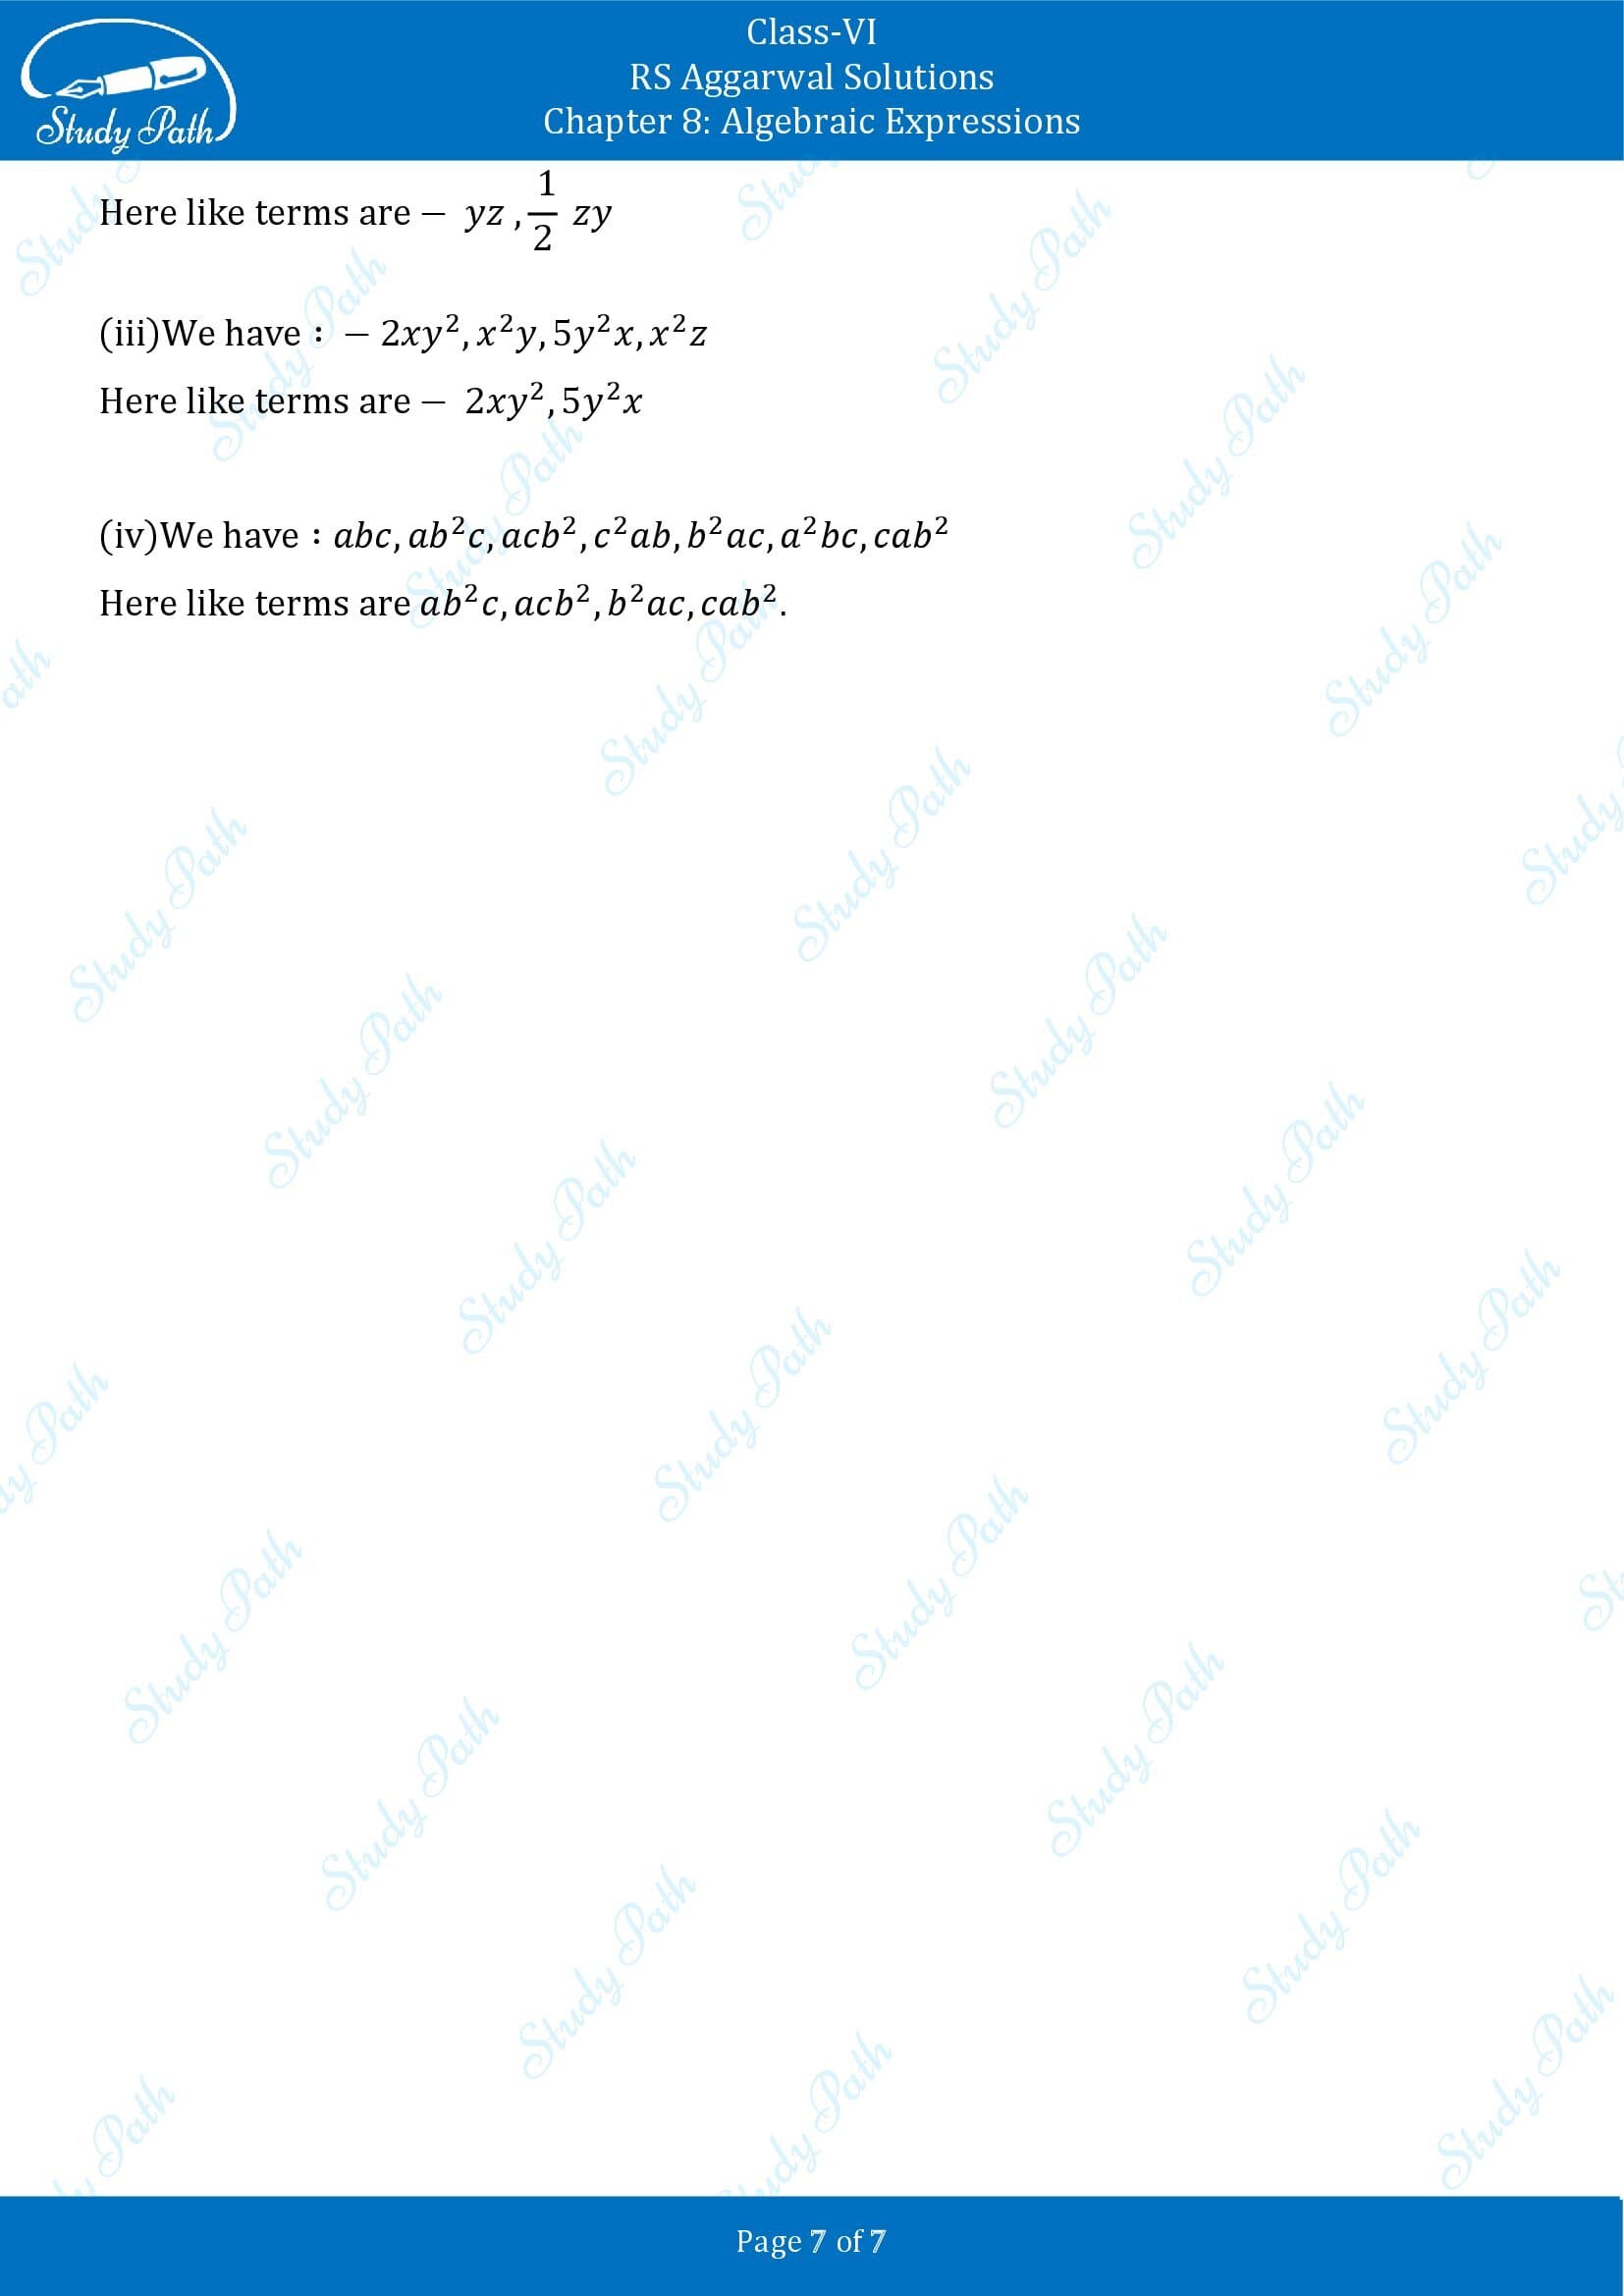 RS Aggarwal Solutions Class 6 Chapter 8 Algebraic Expressions Exercise 8B 0007